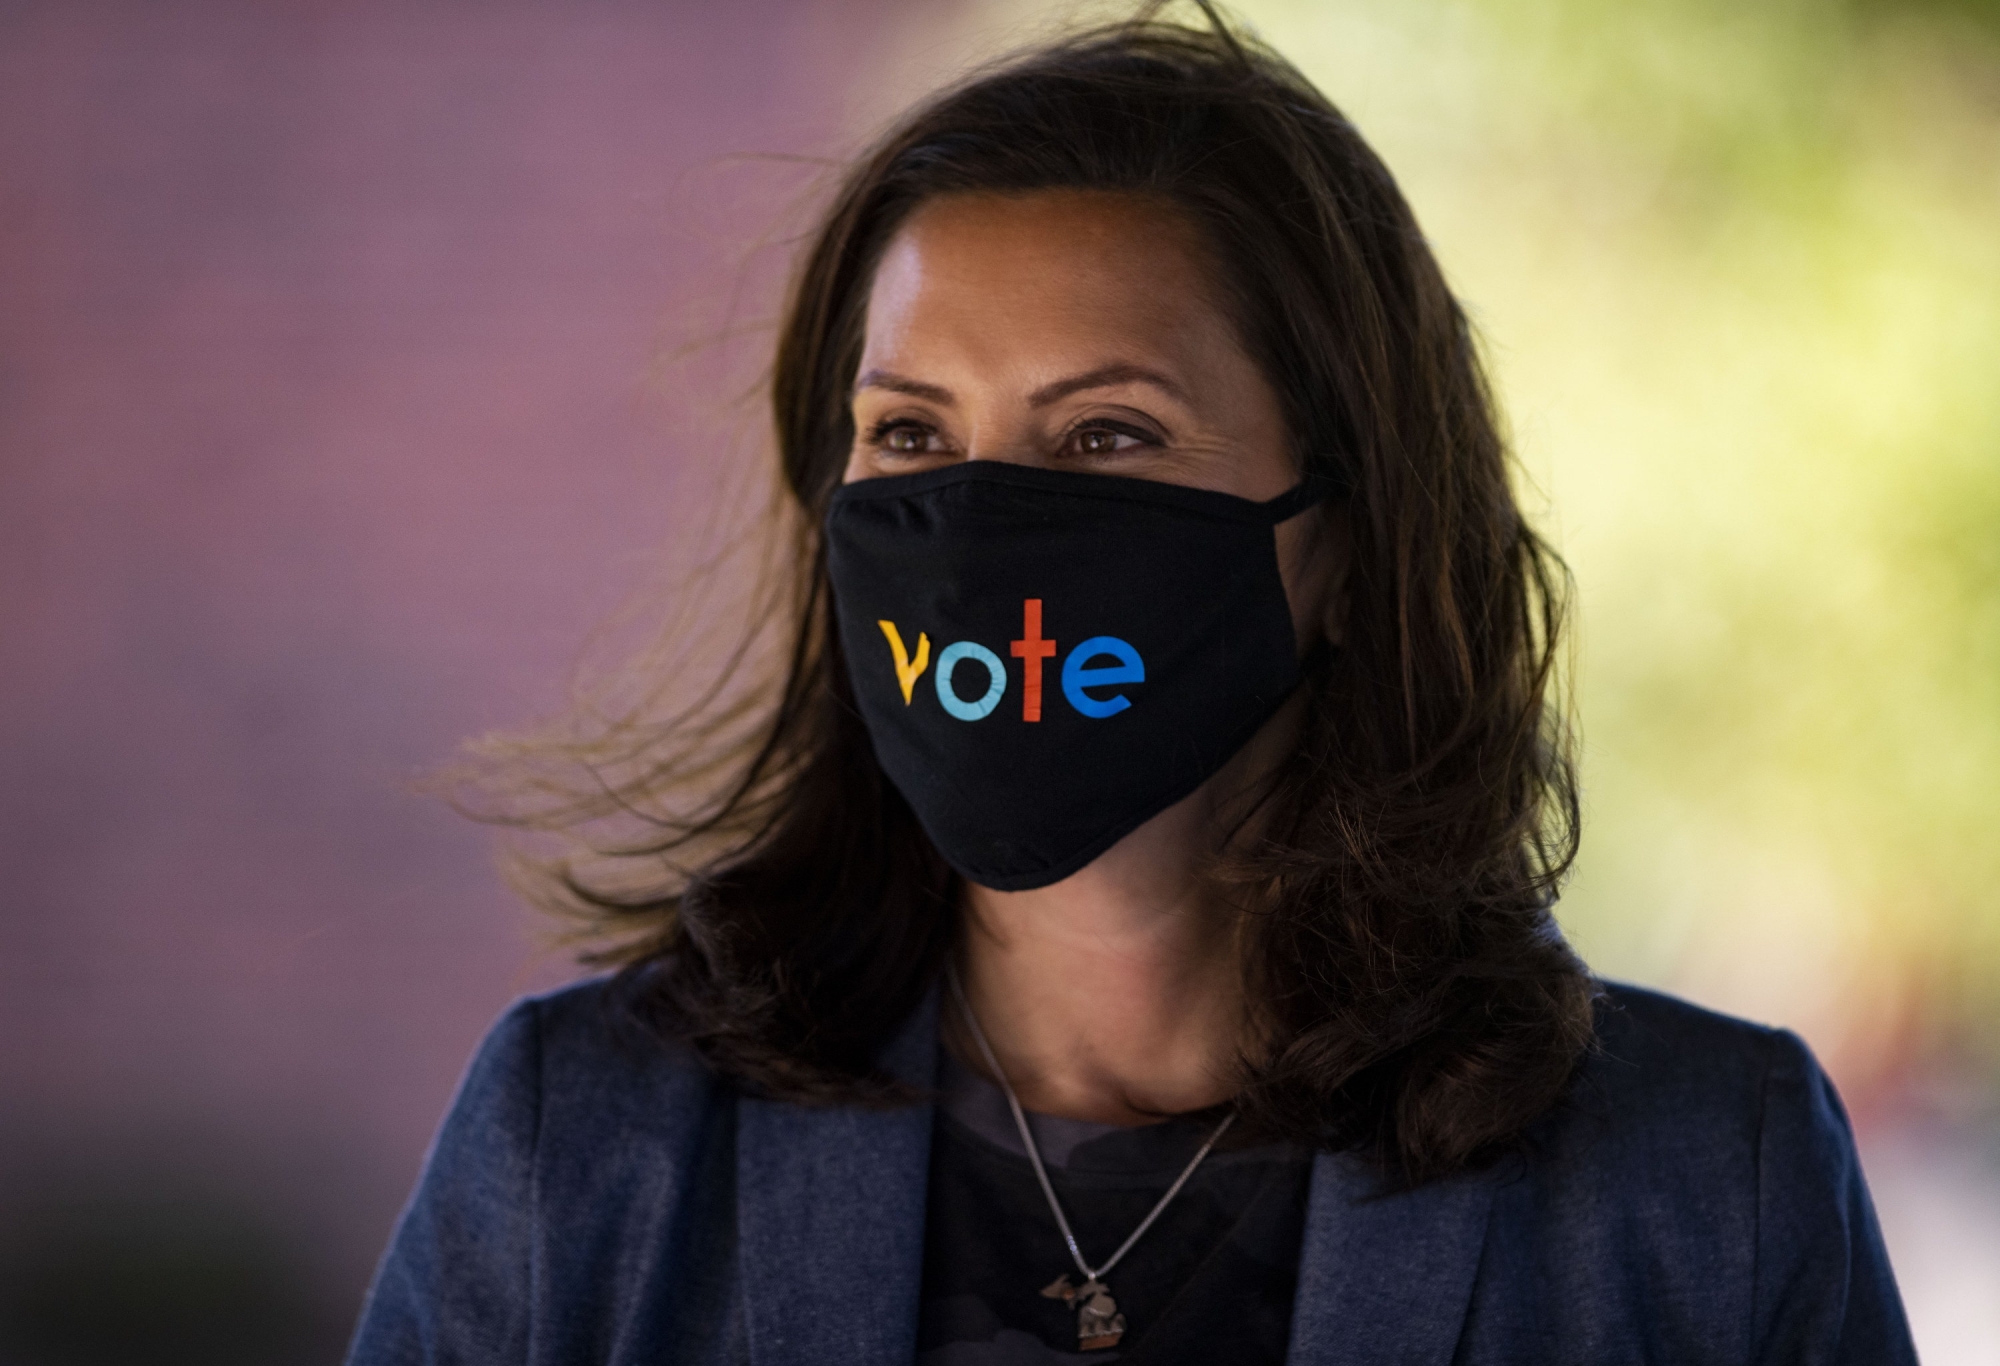 Michigan Gov. Gretchen Whitmer wears a mask with the word "vote" displayed on the front during a roundtable discussion on healthcare, Wednesday Oct. 7, 2020, in Kalamazoo, Mich. The arrest of a group of anti-government vigilantes in a kidnapping plot against Michigan Gov. Gretchen Whitmer presents a new twist in the 2020 political fight for the battleground state. (Nicole Hester/Ann Arbor News via AP)/ ArcInfo